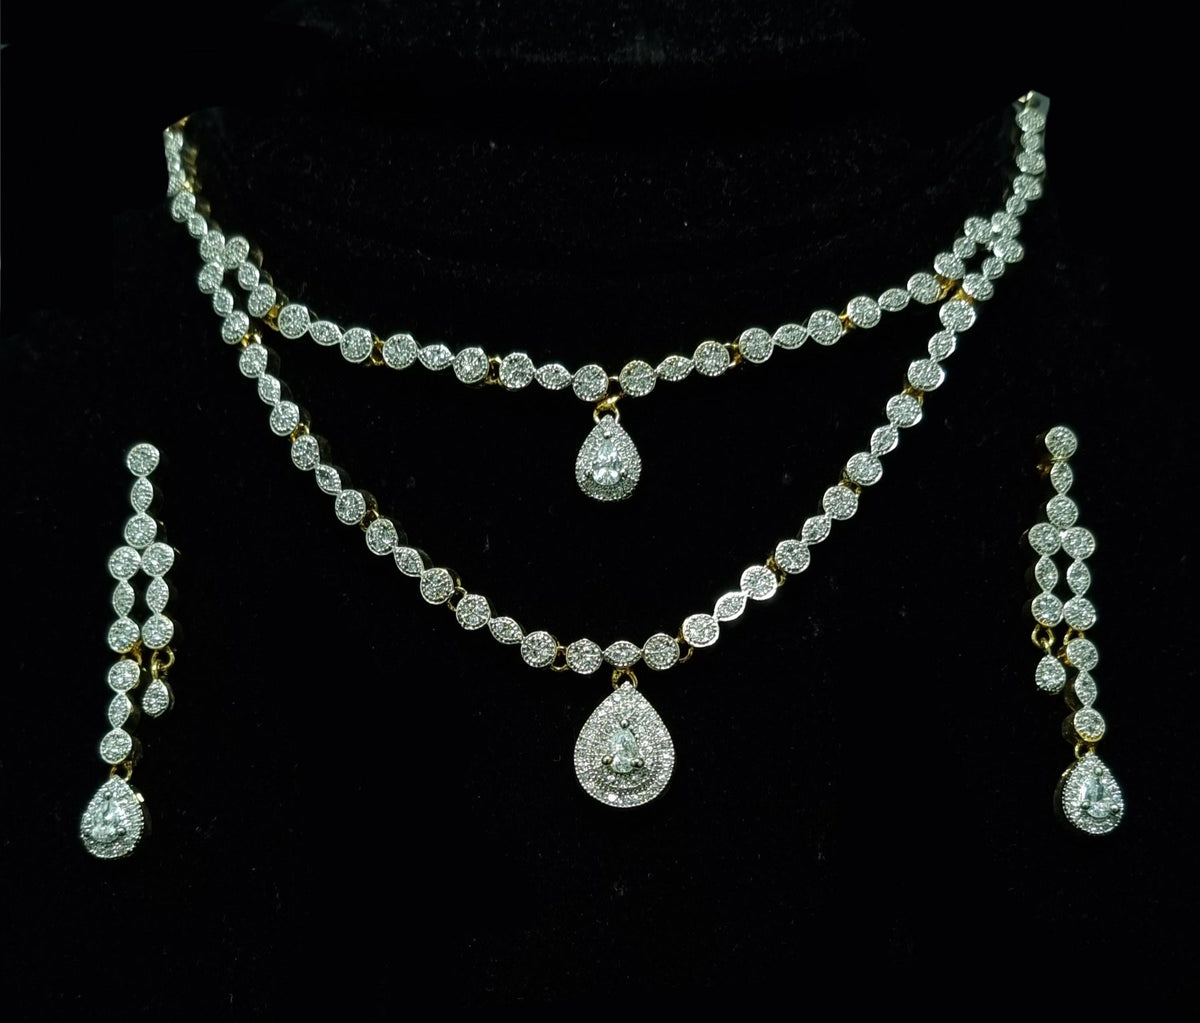 Silver 925 Gold-Plated Alluring Duo Layered Diamond- Like Stones Studded Necklace With A Tear Shaped Diamond-LIKE Necklace Earrings Set.